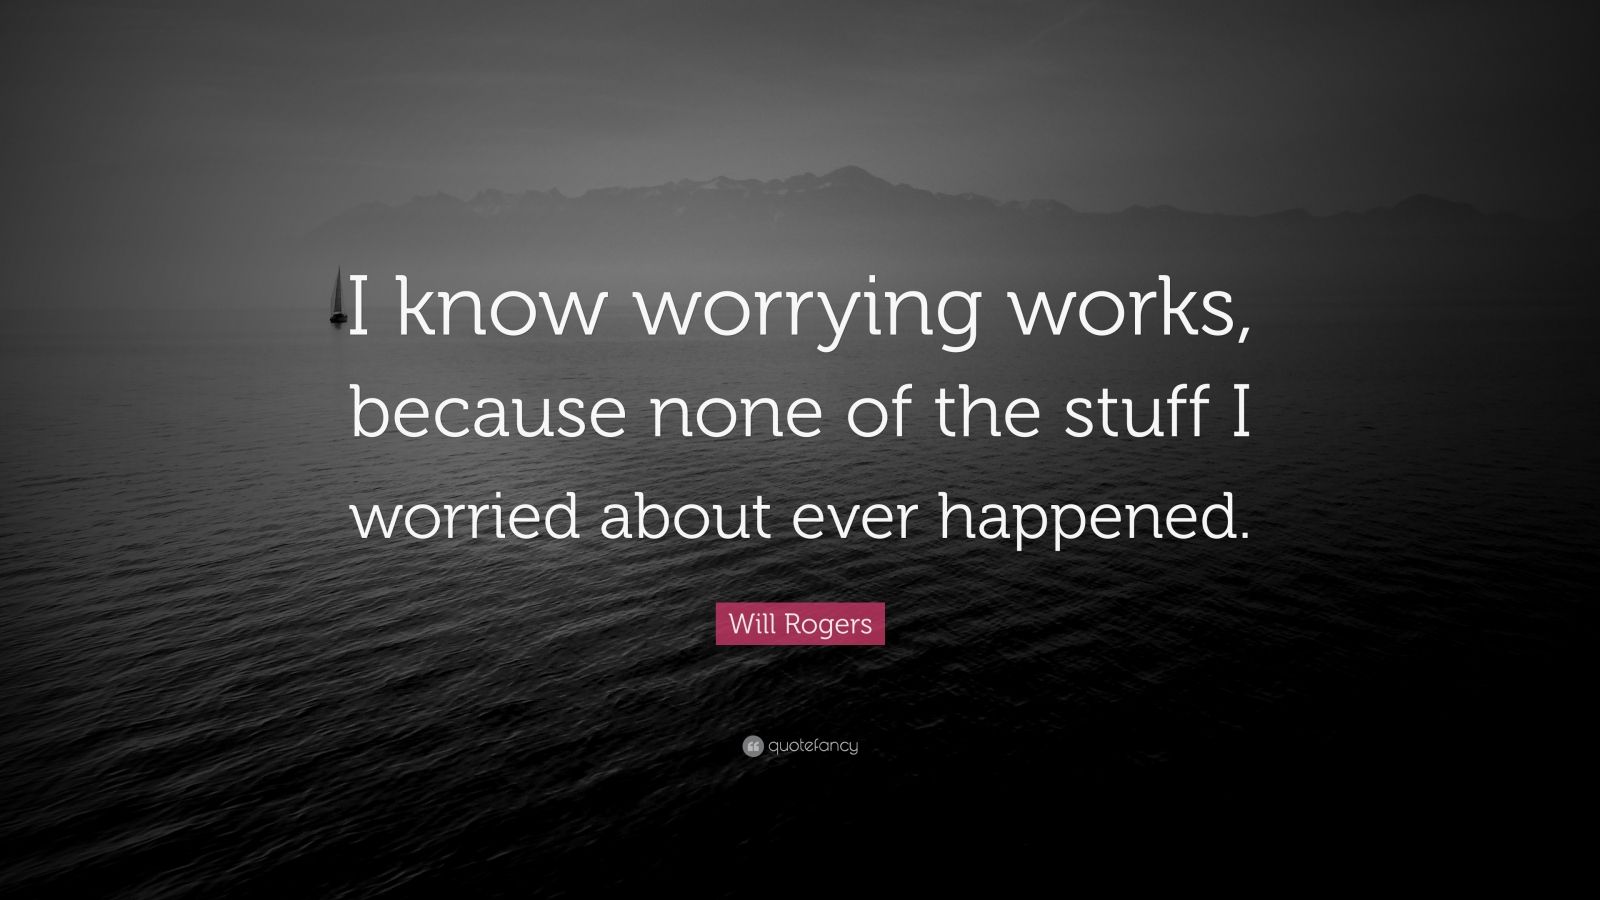 Will Rogers Quote: “I know worrying works, because none of the stuff I ...